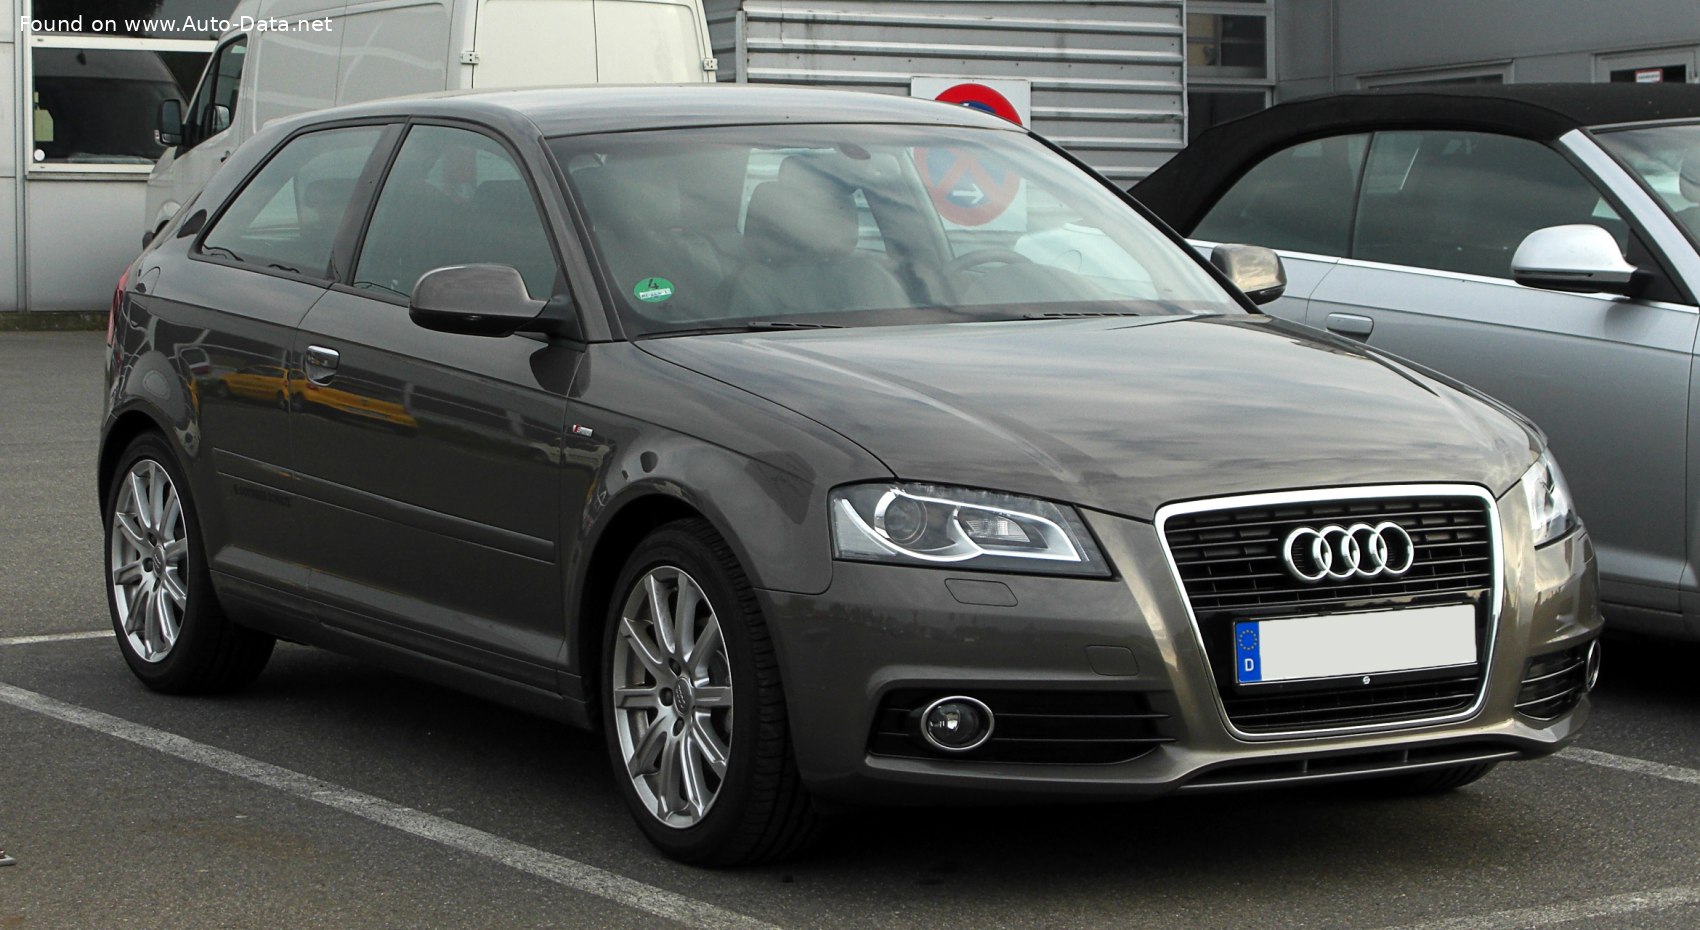 2008 Audi A3 ( 8P ) by Sportec #292865 - Best quality free high